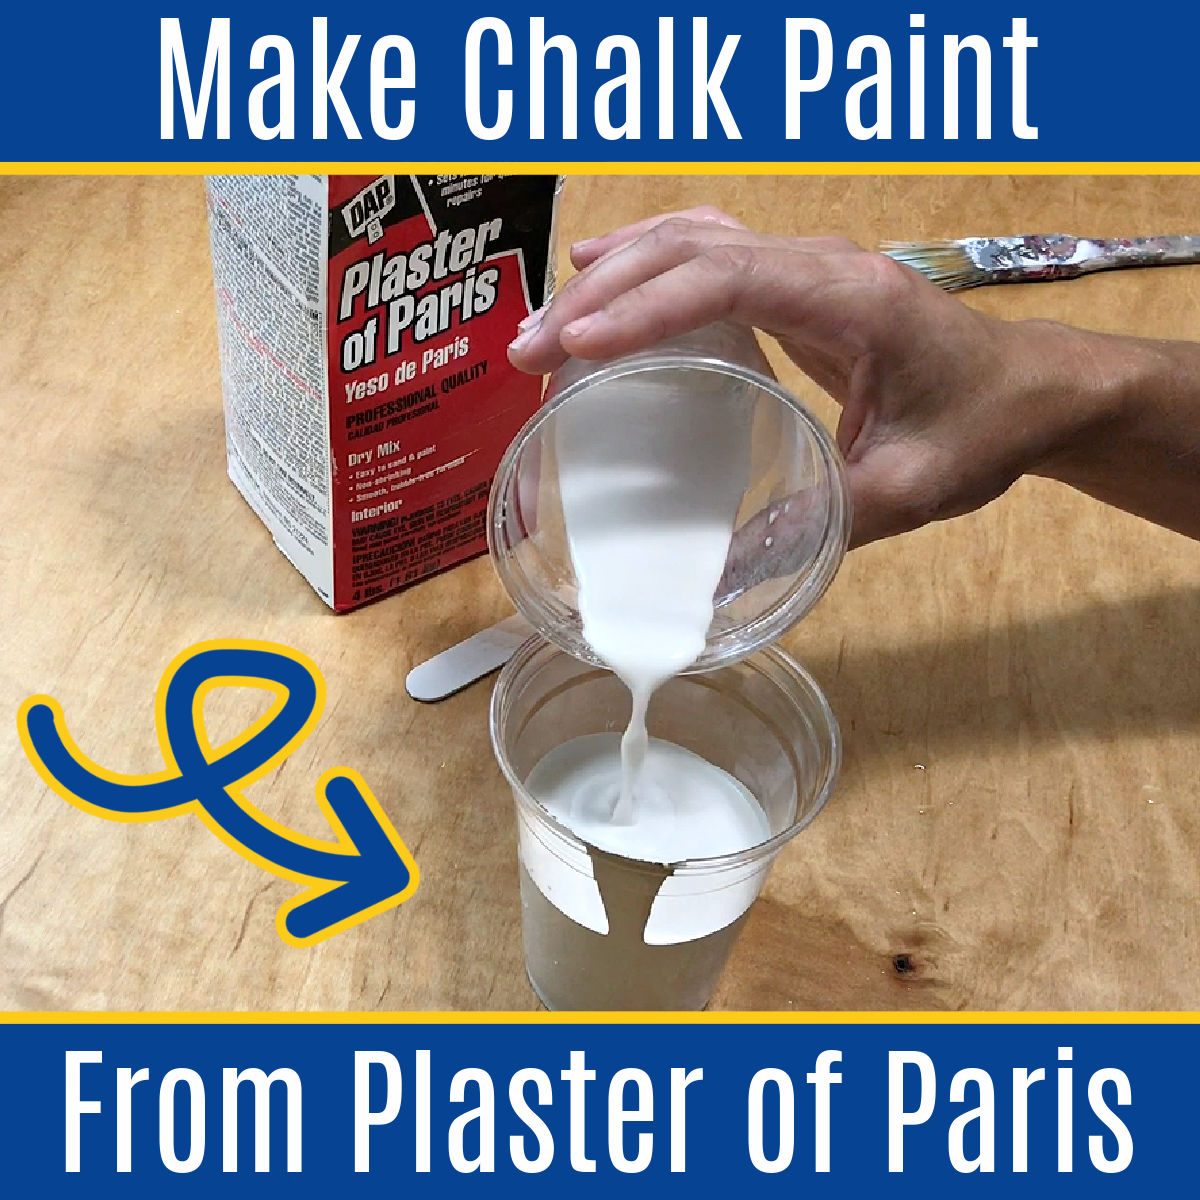 How To Make Chalk Paint with Plaster of Paris - Easy Recipe